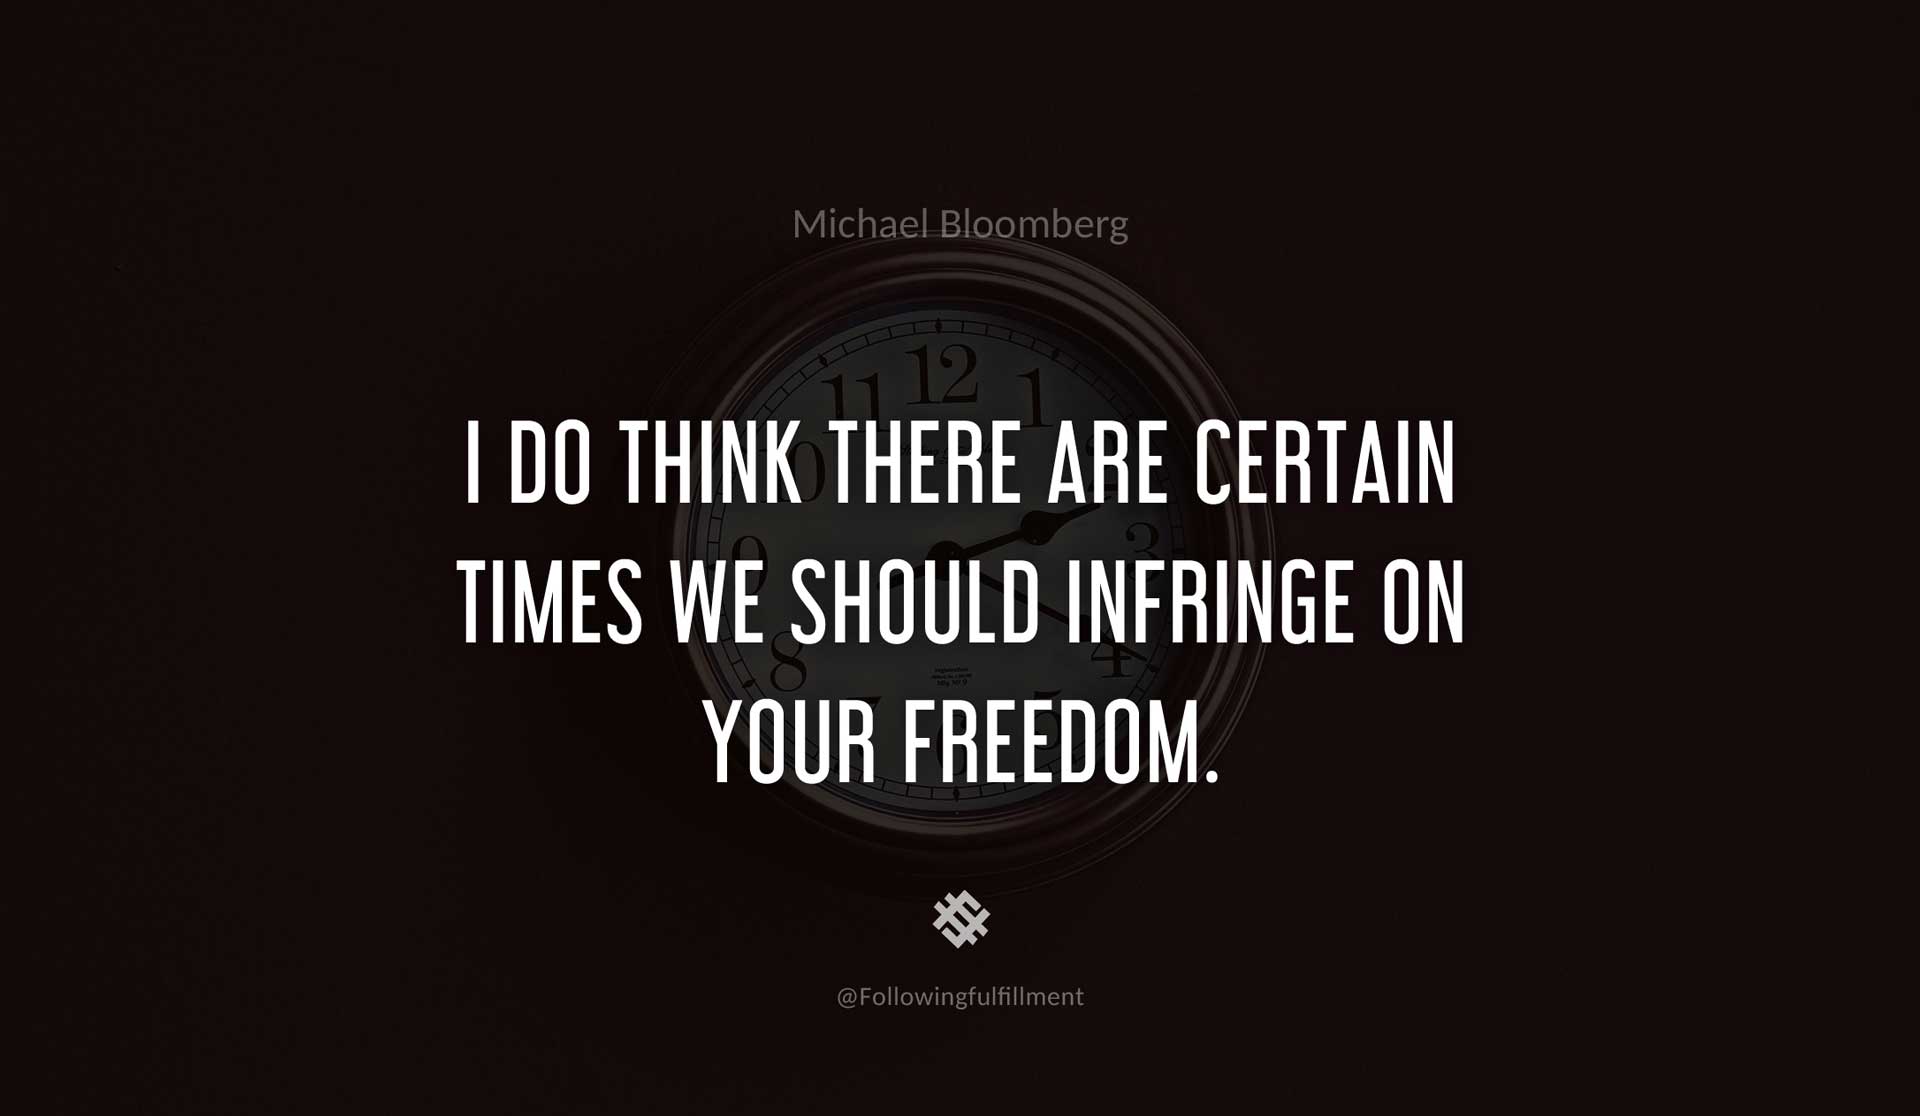 I-do-think-there-are-certain-times-we-should-infringe-on-your-freedom.-MICHAEL-BLOOMBERG-Quote.jpg